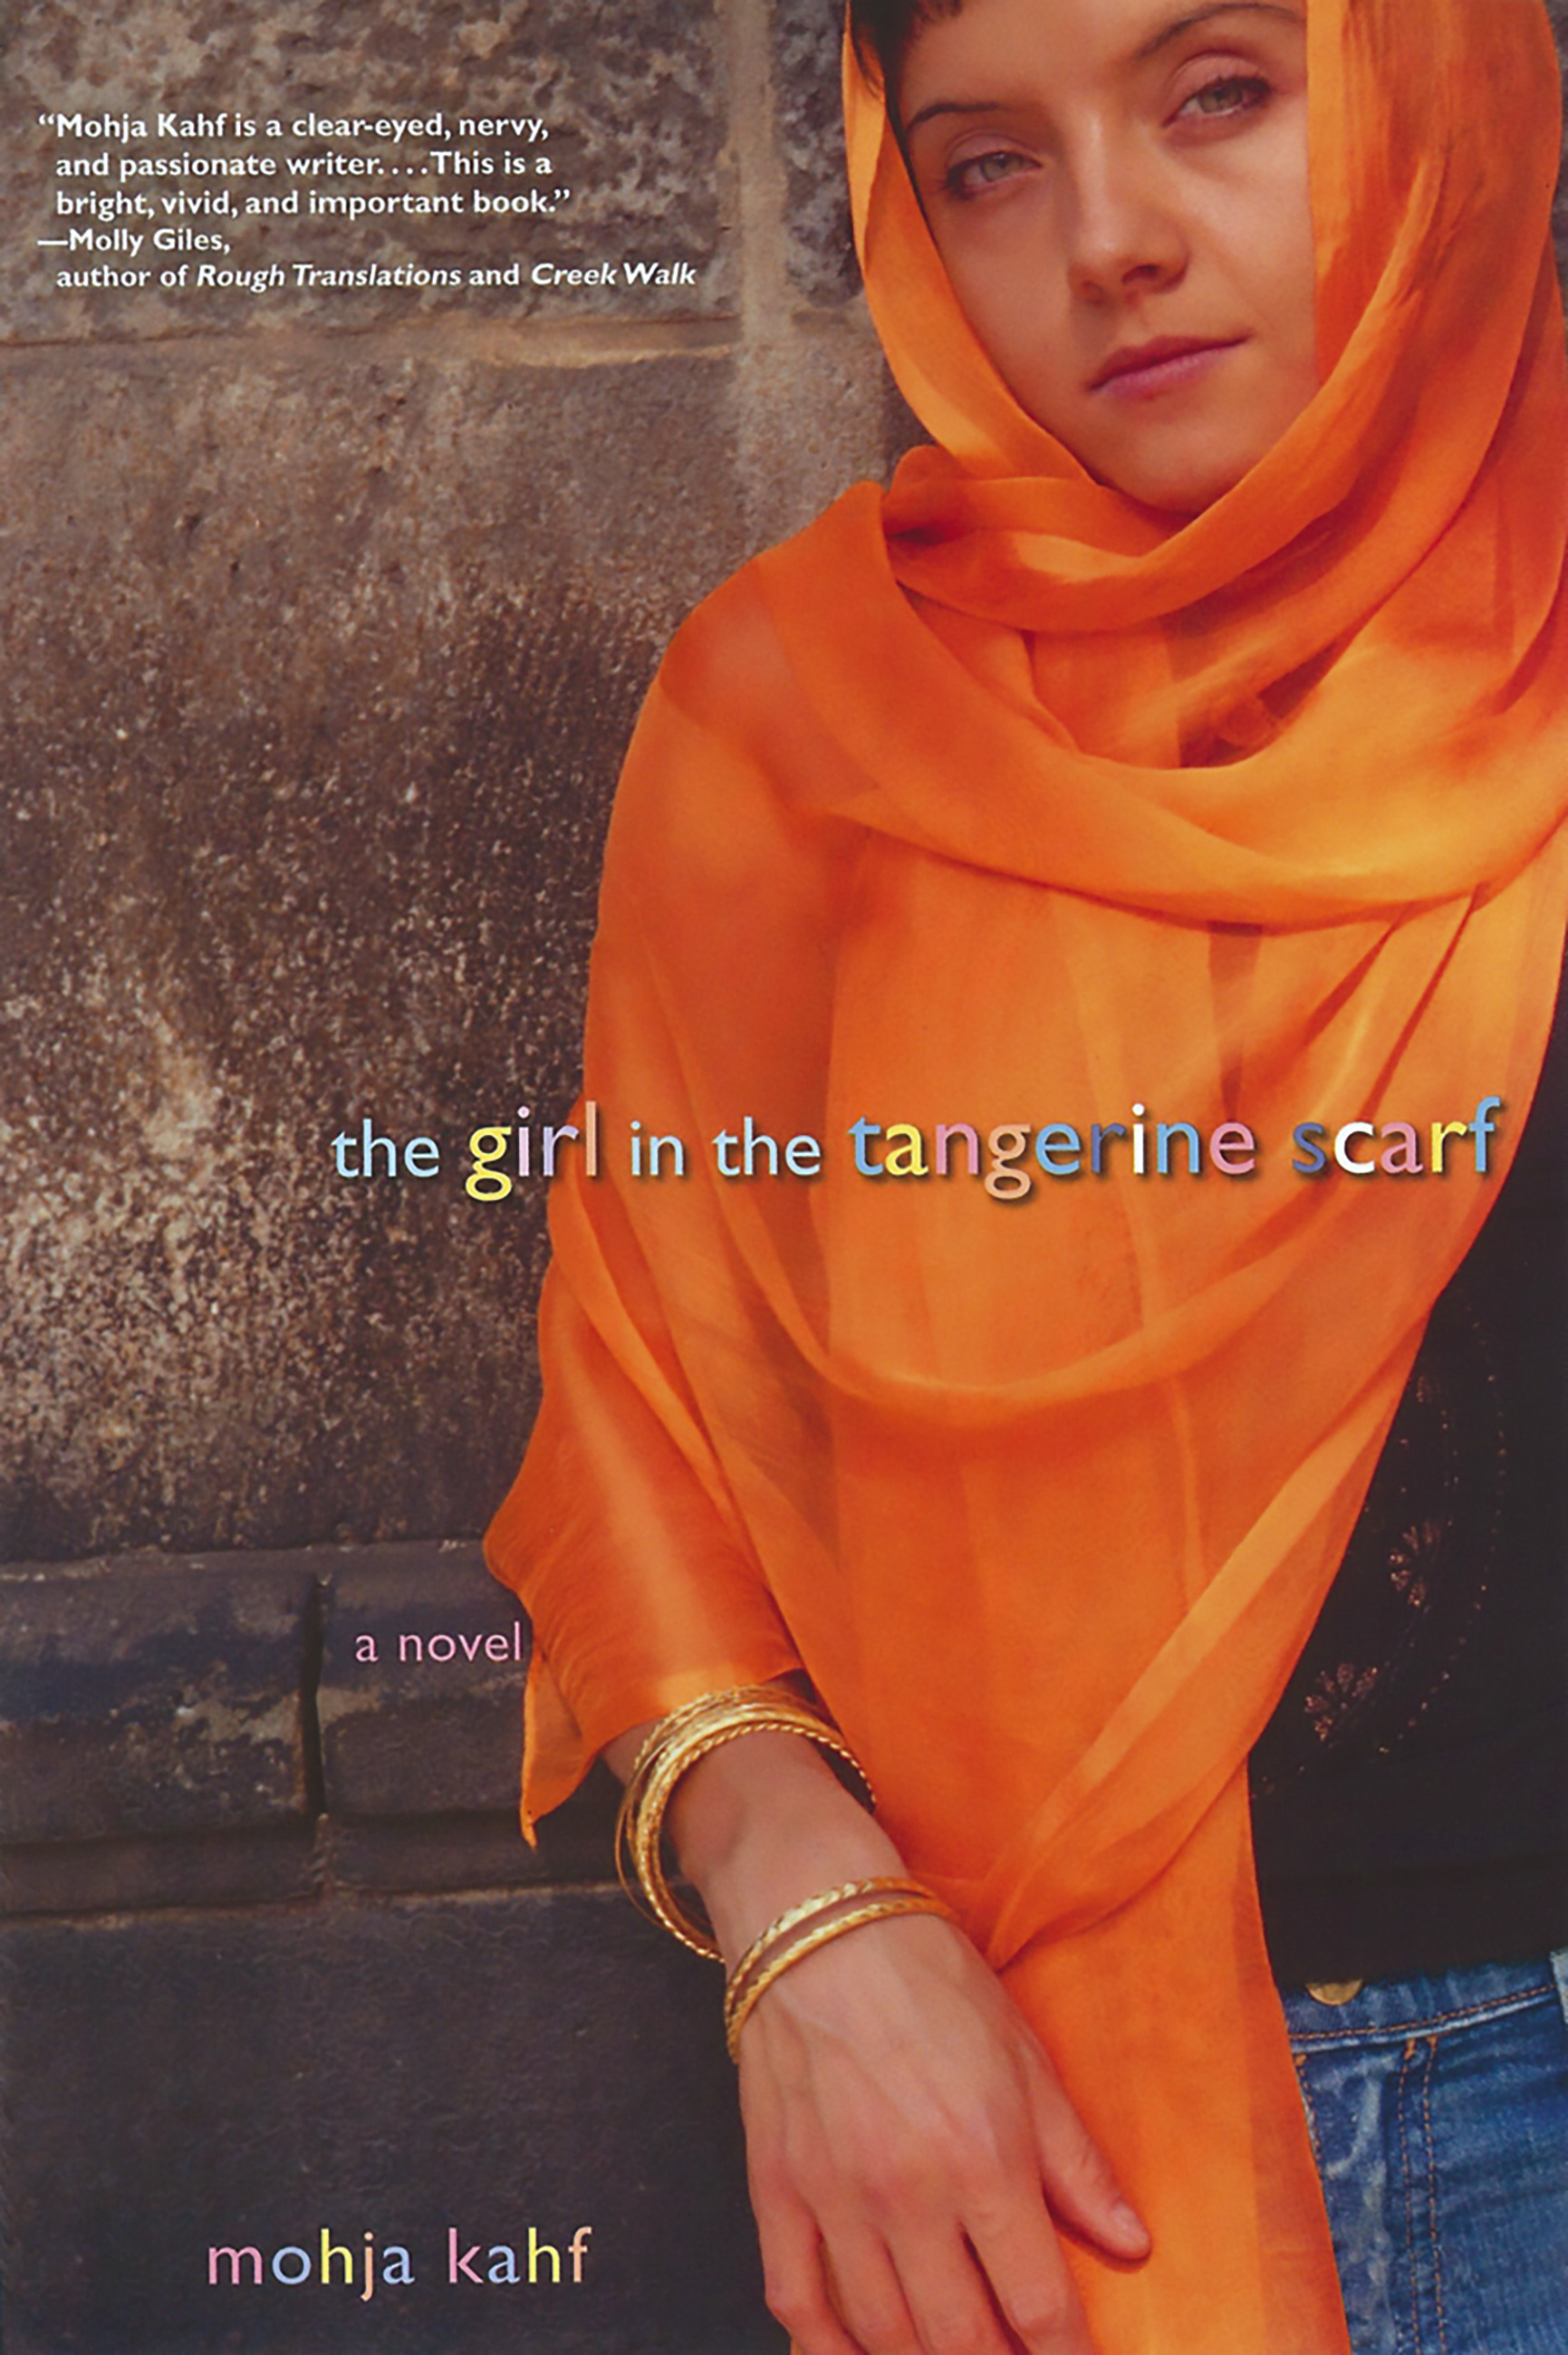 The Girl in the Tangerine Scarf by Mojha Kahf